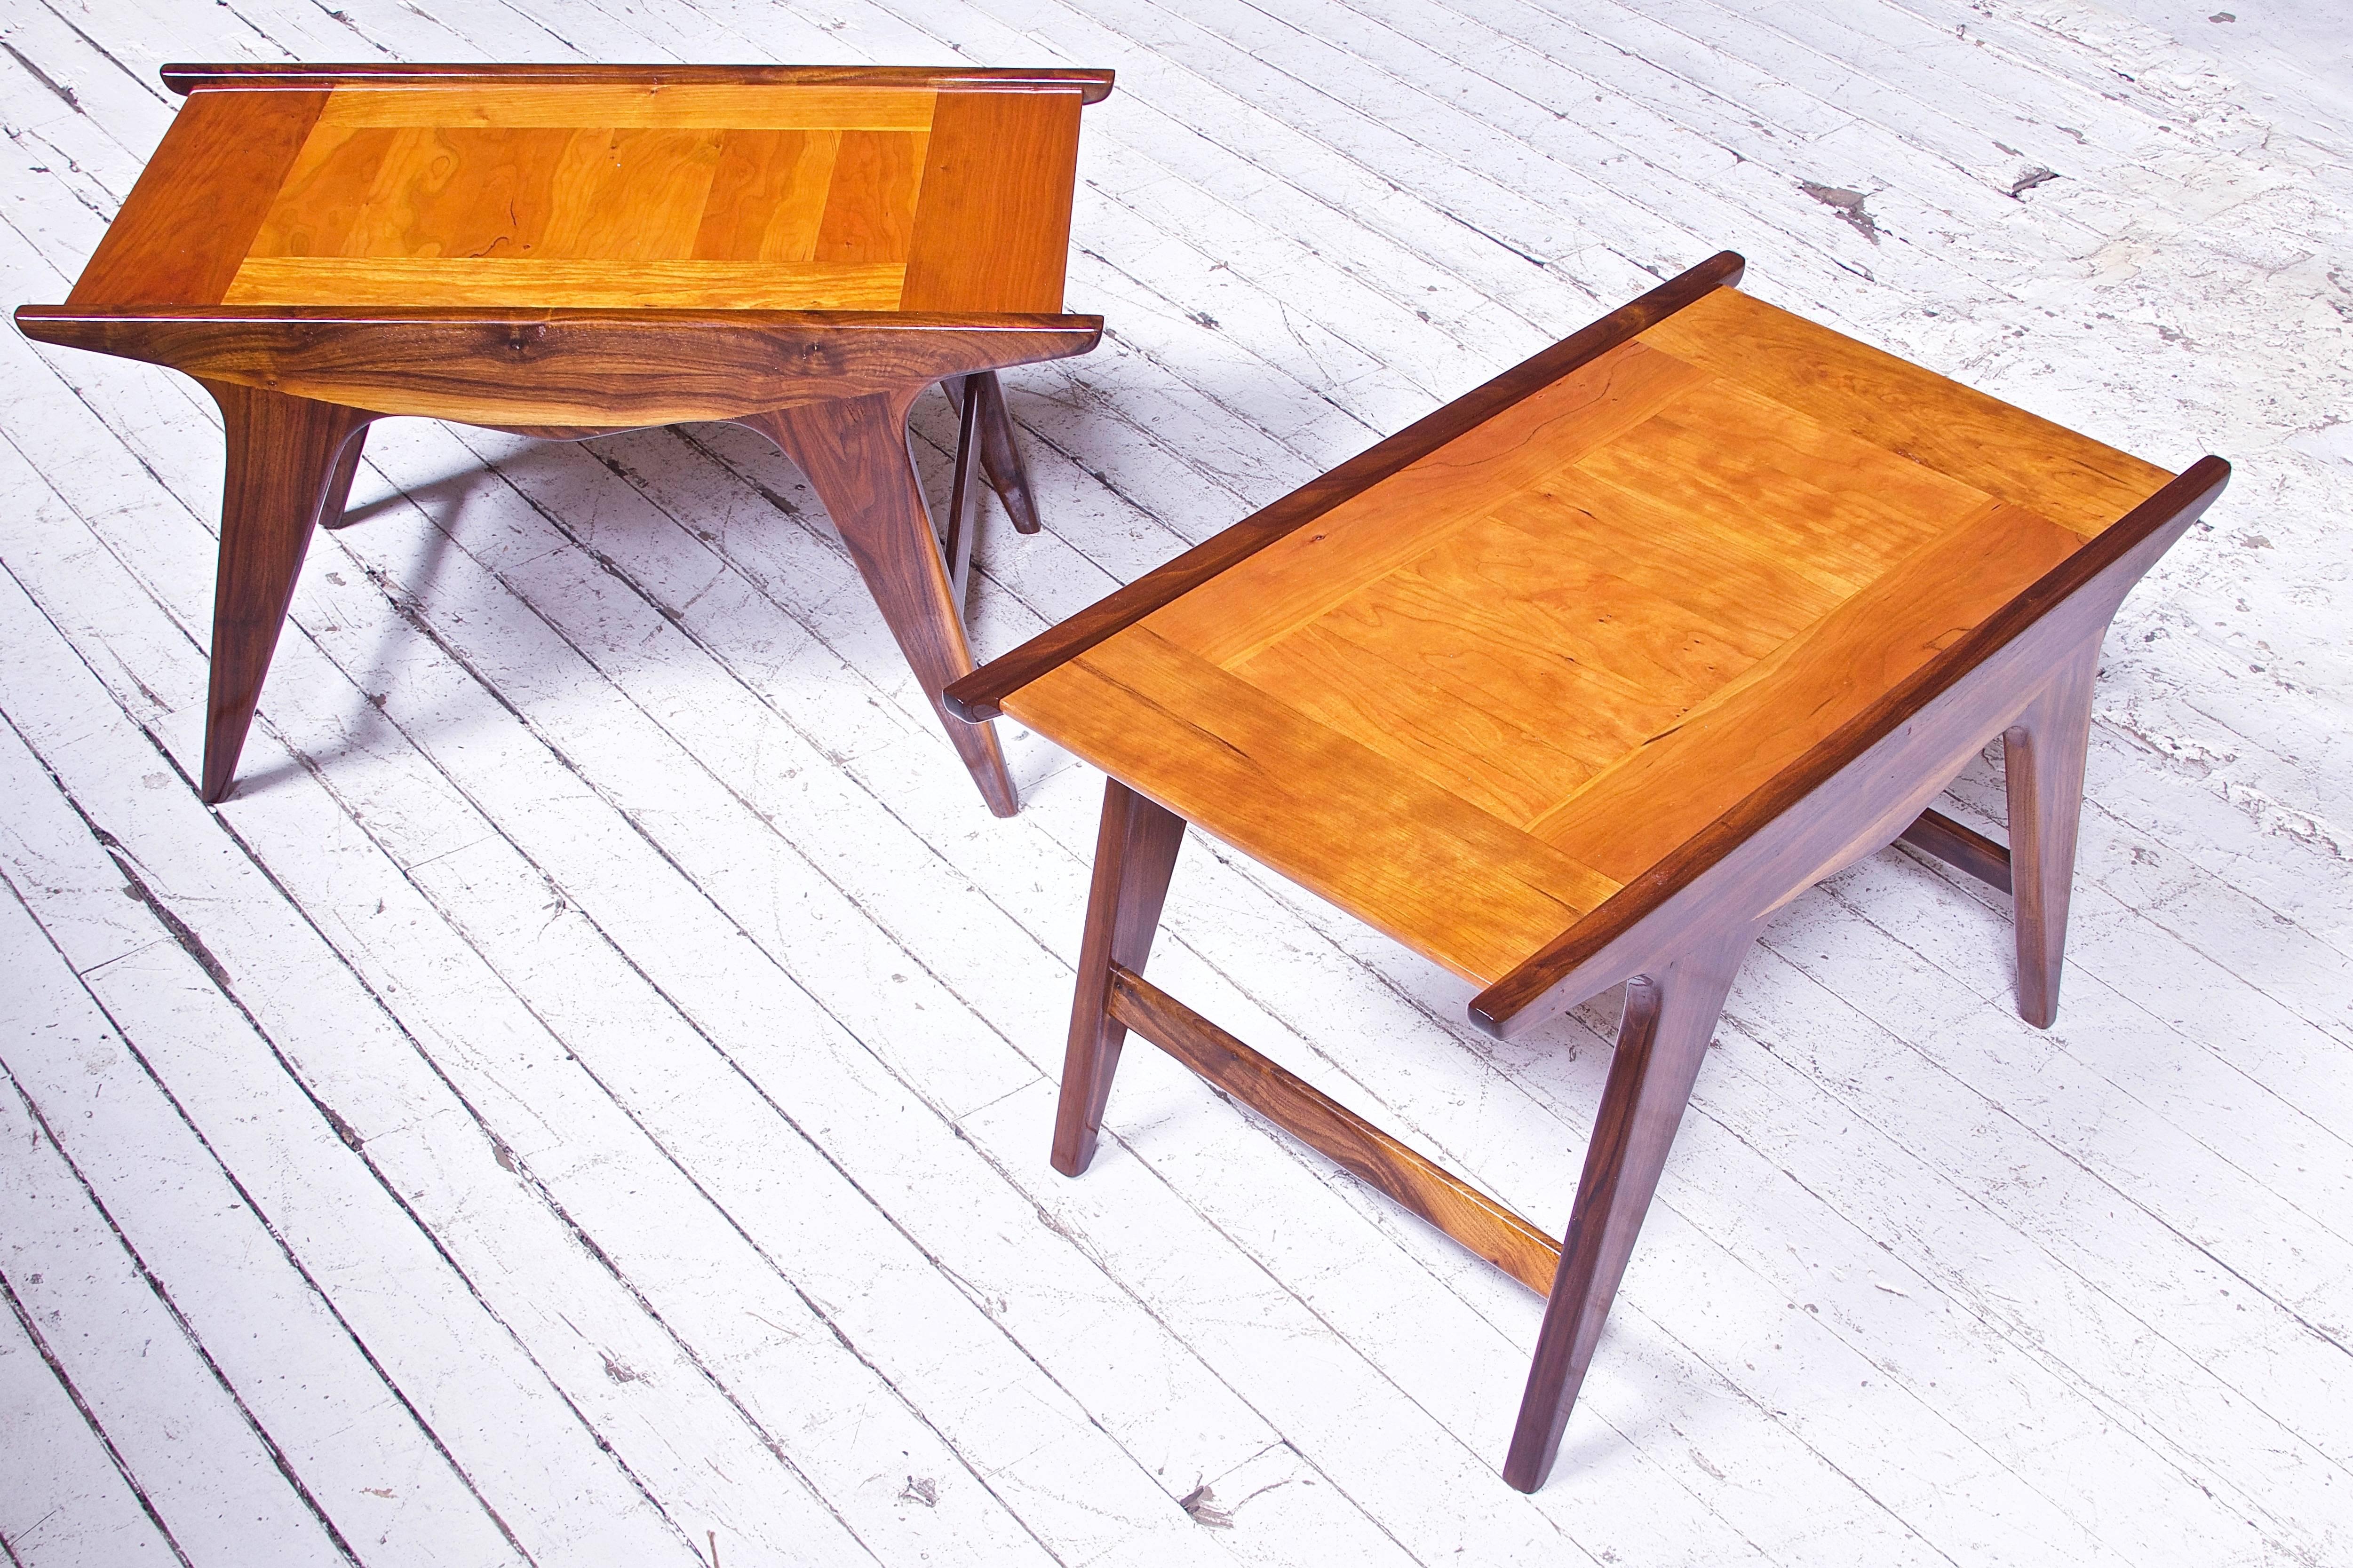 A pair of limited edition 'Tavolinetto' end tables in walnut and cherry designed by Angelo Montaperto, handmade by Montaperto Studios-2017. This particular form was inspired by Italian modern design of the 20th century, as well as the American